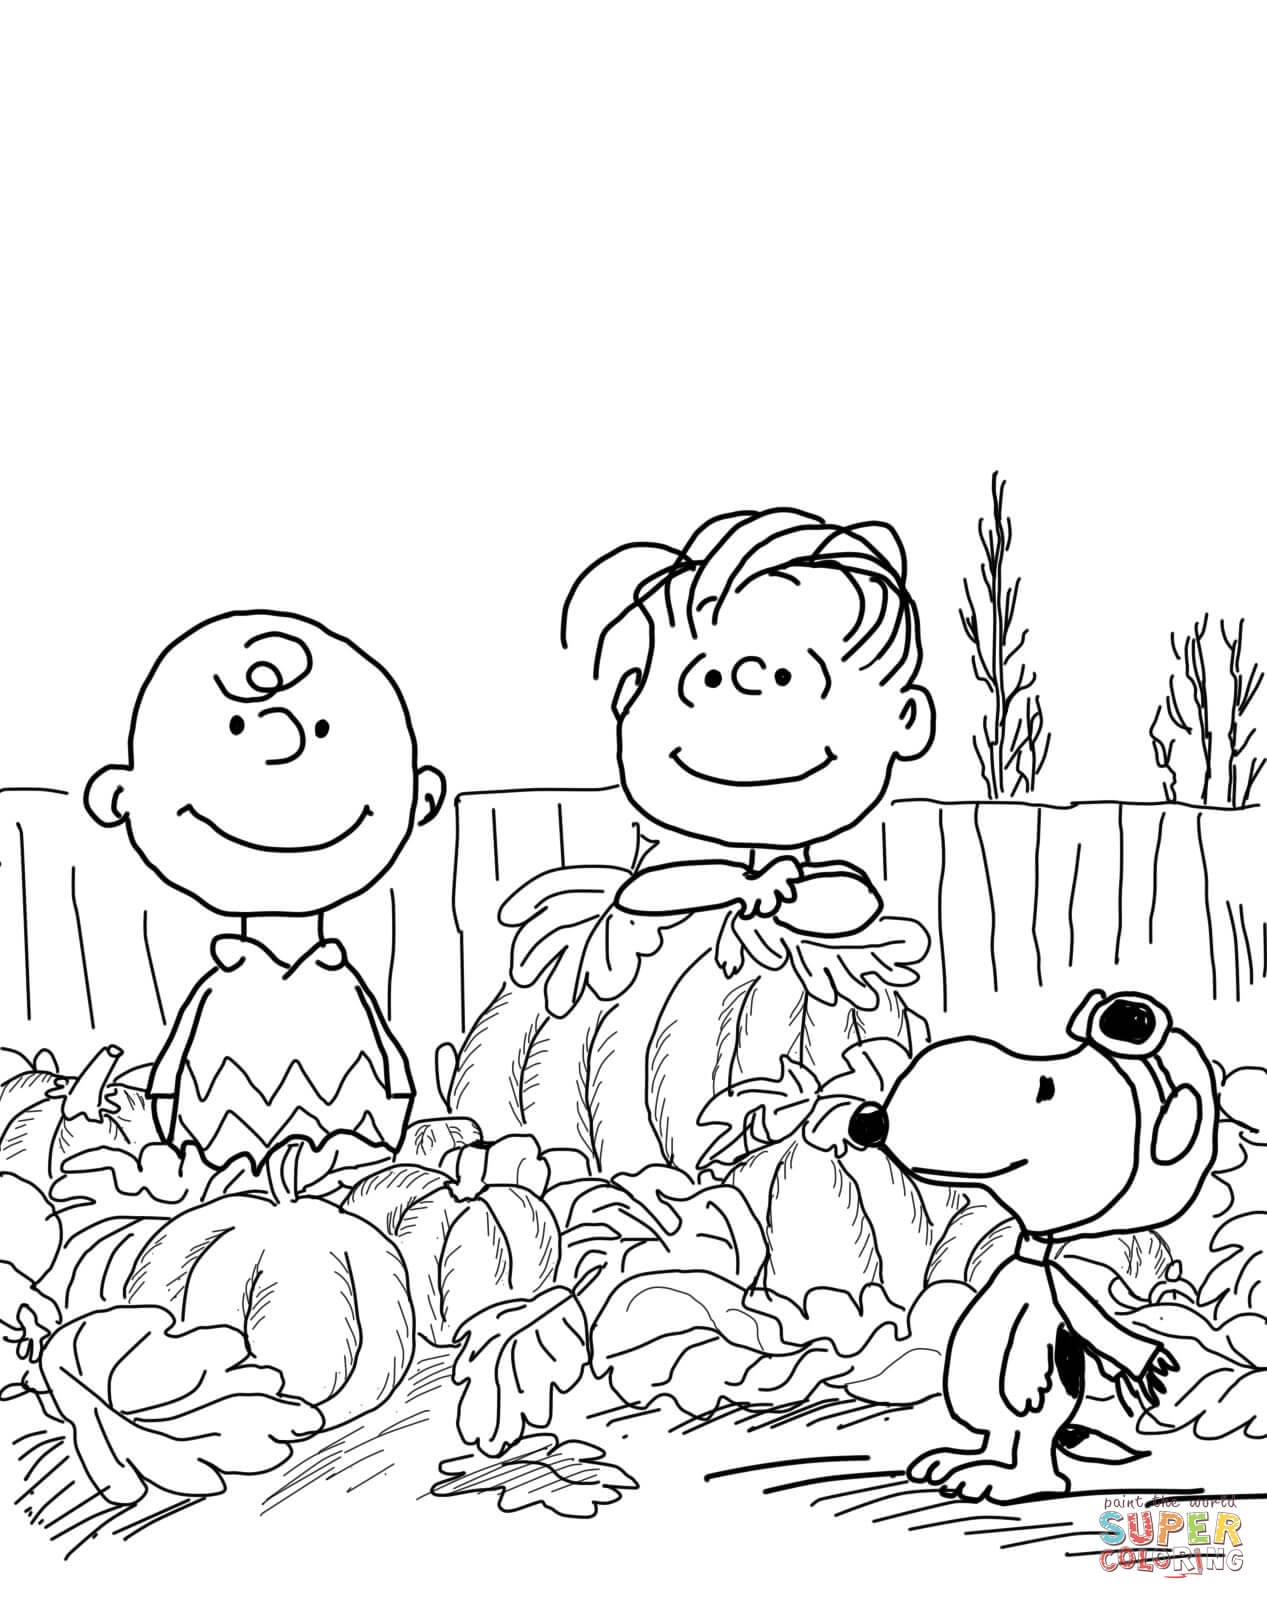 Charlie Brown Christmas Coloring Pages at GetColorings.com ...